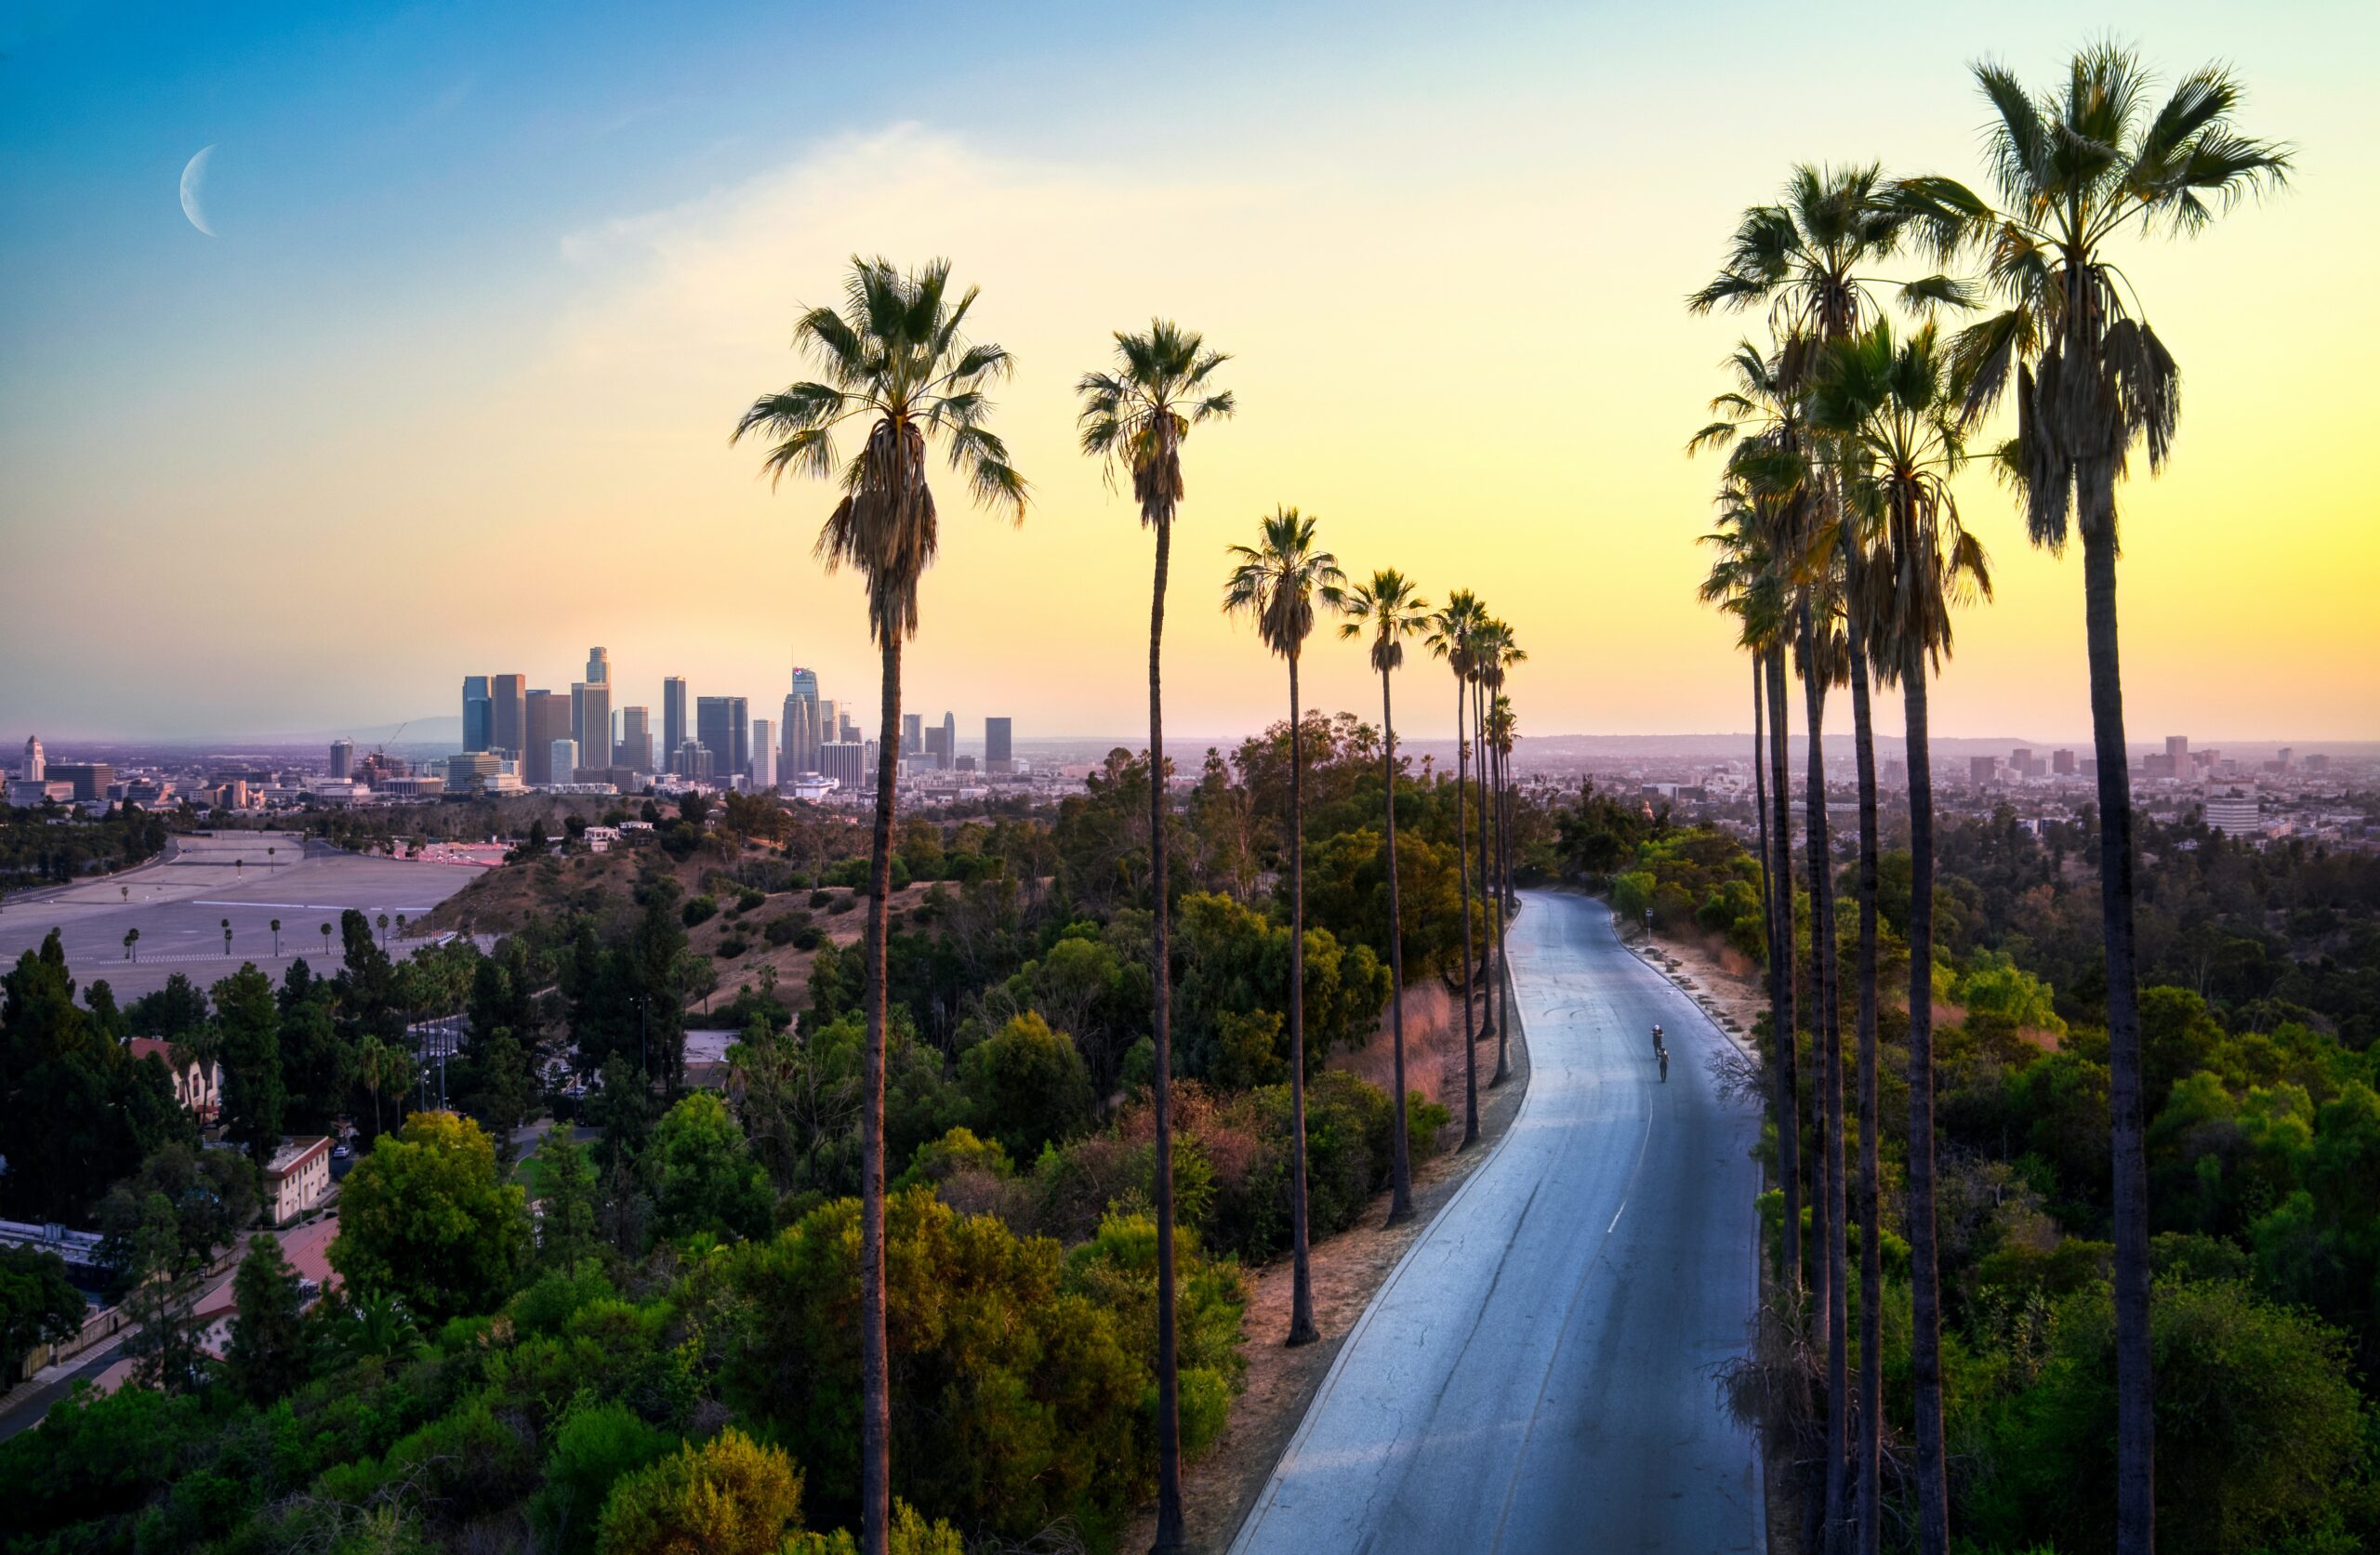 Known for Palm trees, beautiful beaches and pop culture, Los Angeles is also one of the most expensive cities to live in the U.S. Pictured: A few of palm trees in L.A. with the city behind it.